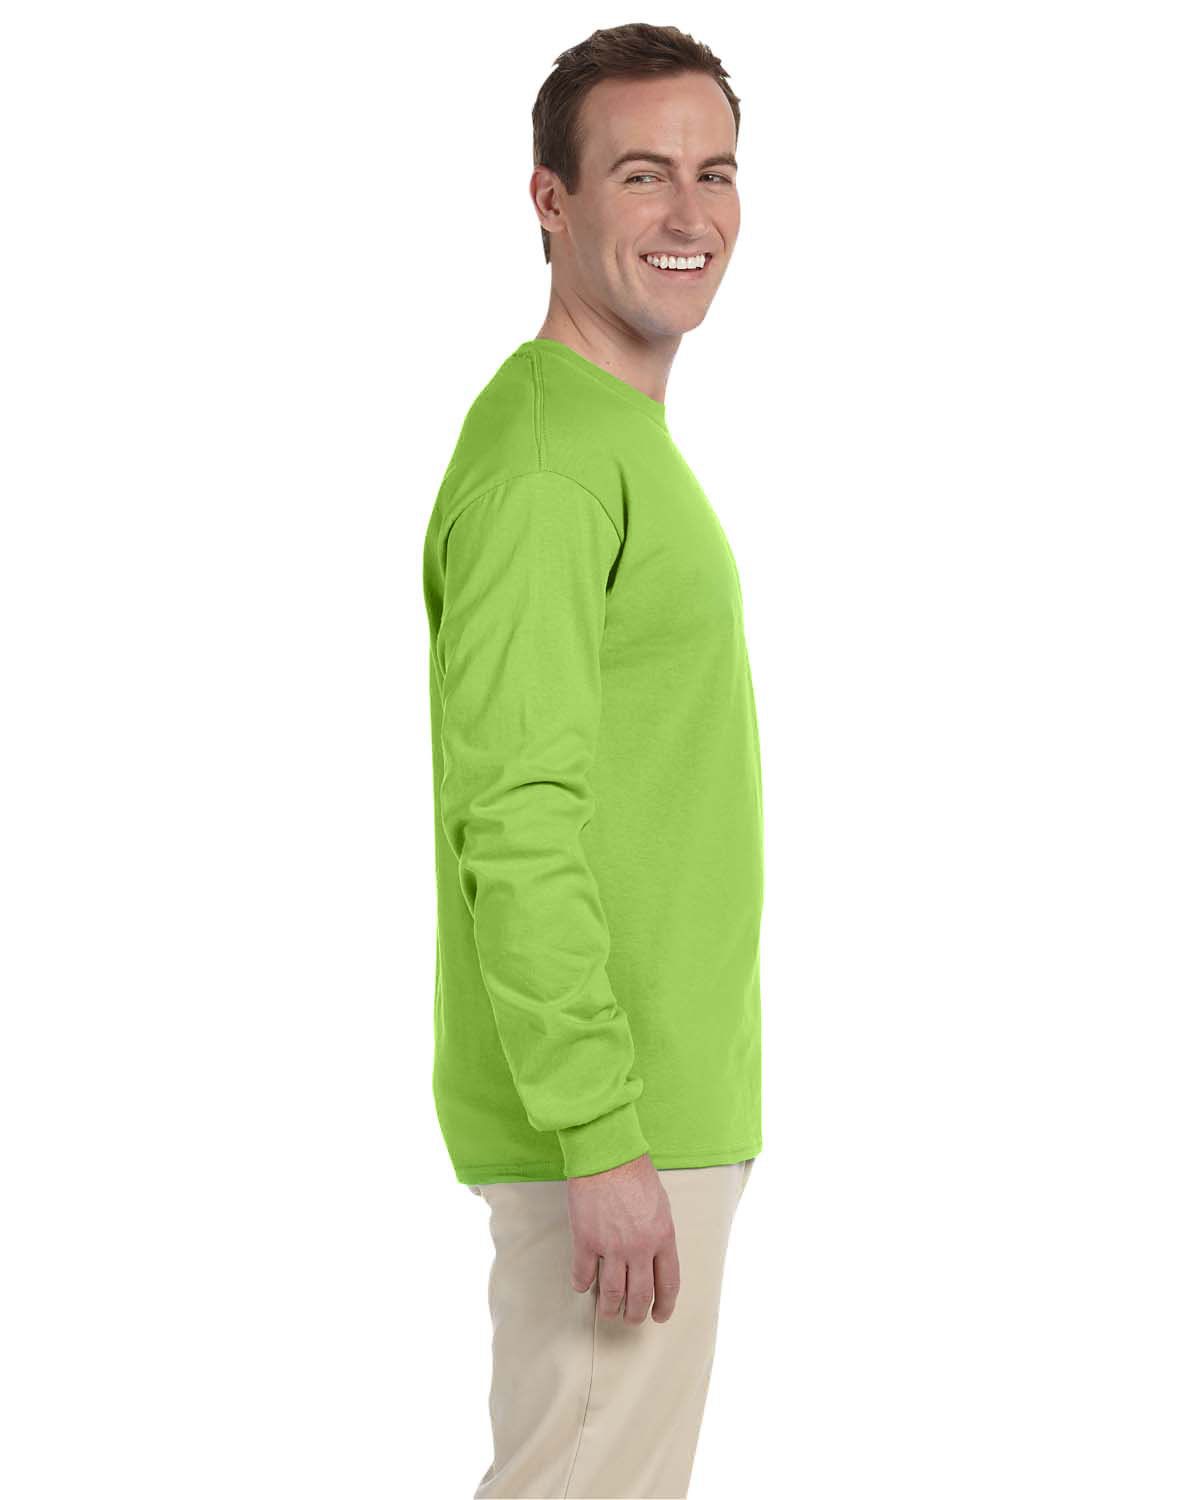 Fruit of the Loom 4930, HD Cotton ™ 100% Cotton Long Sleeve T-Shirt